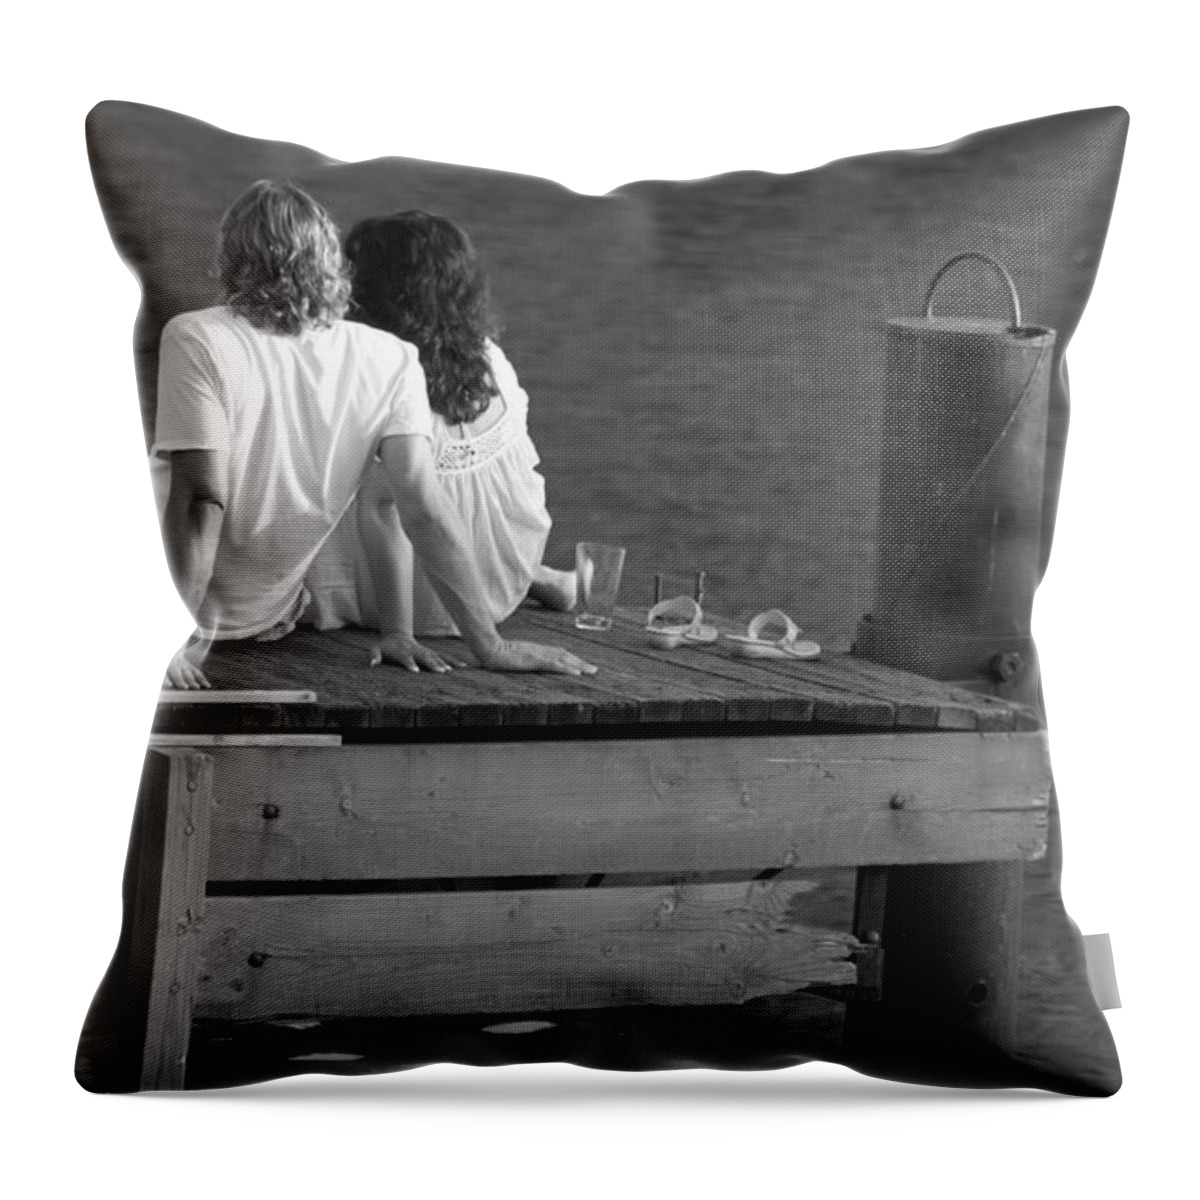 Relax Throw Pillow featuring the photograph Relax by Lauri Novak